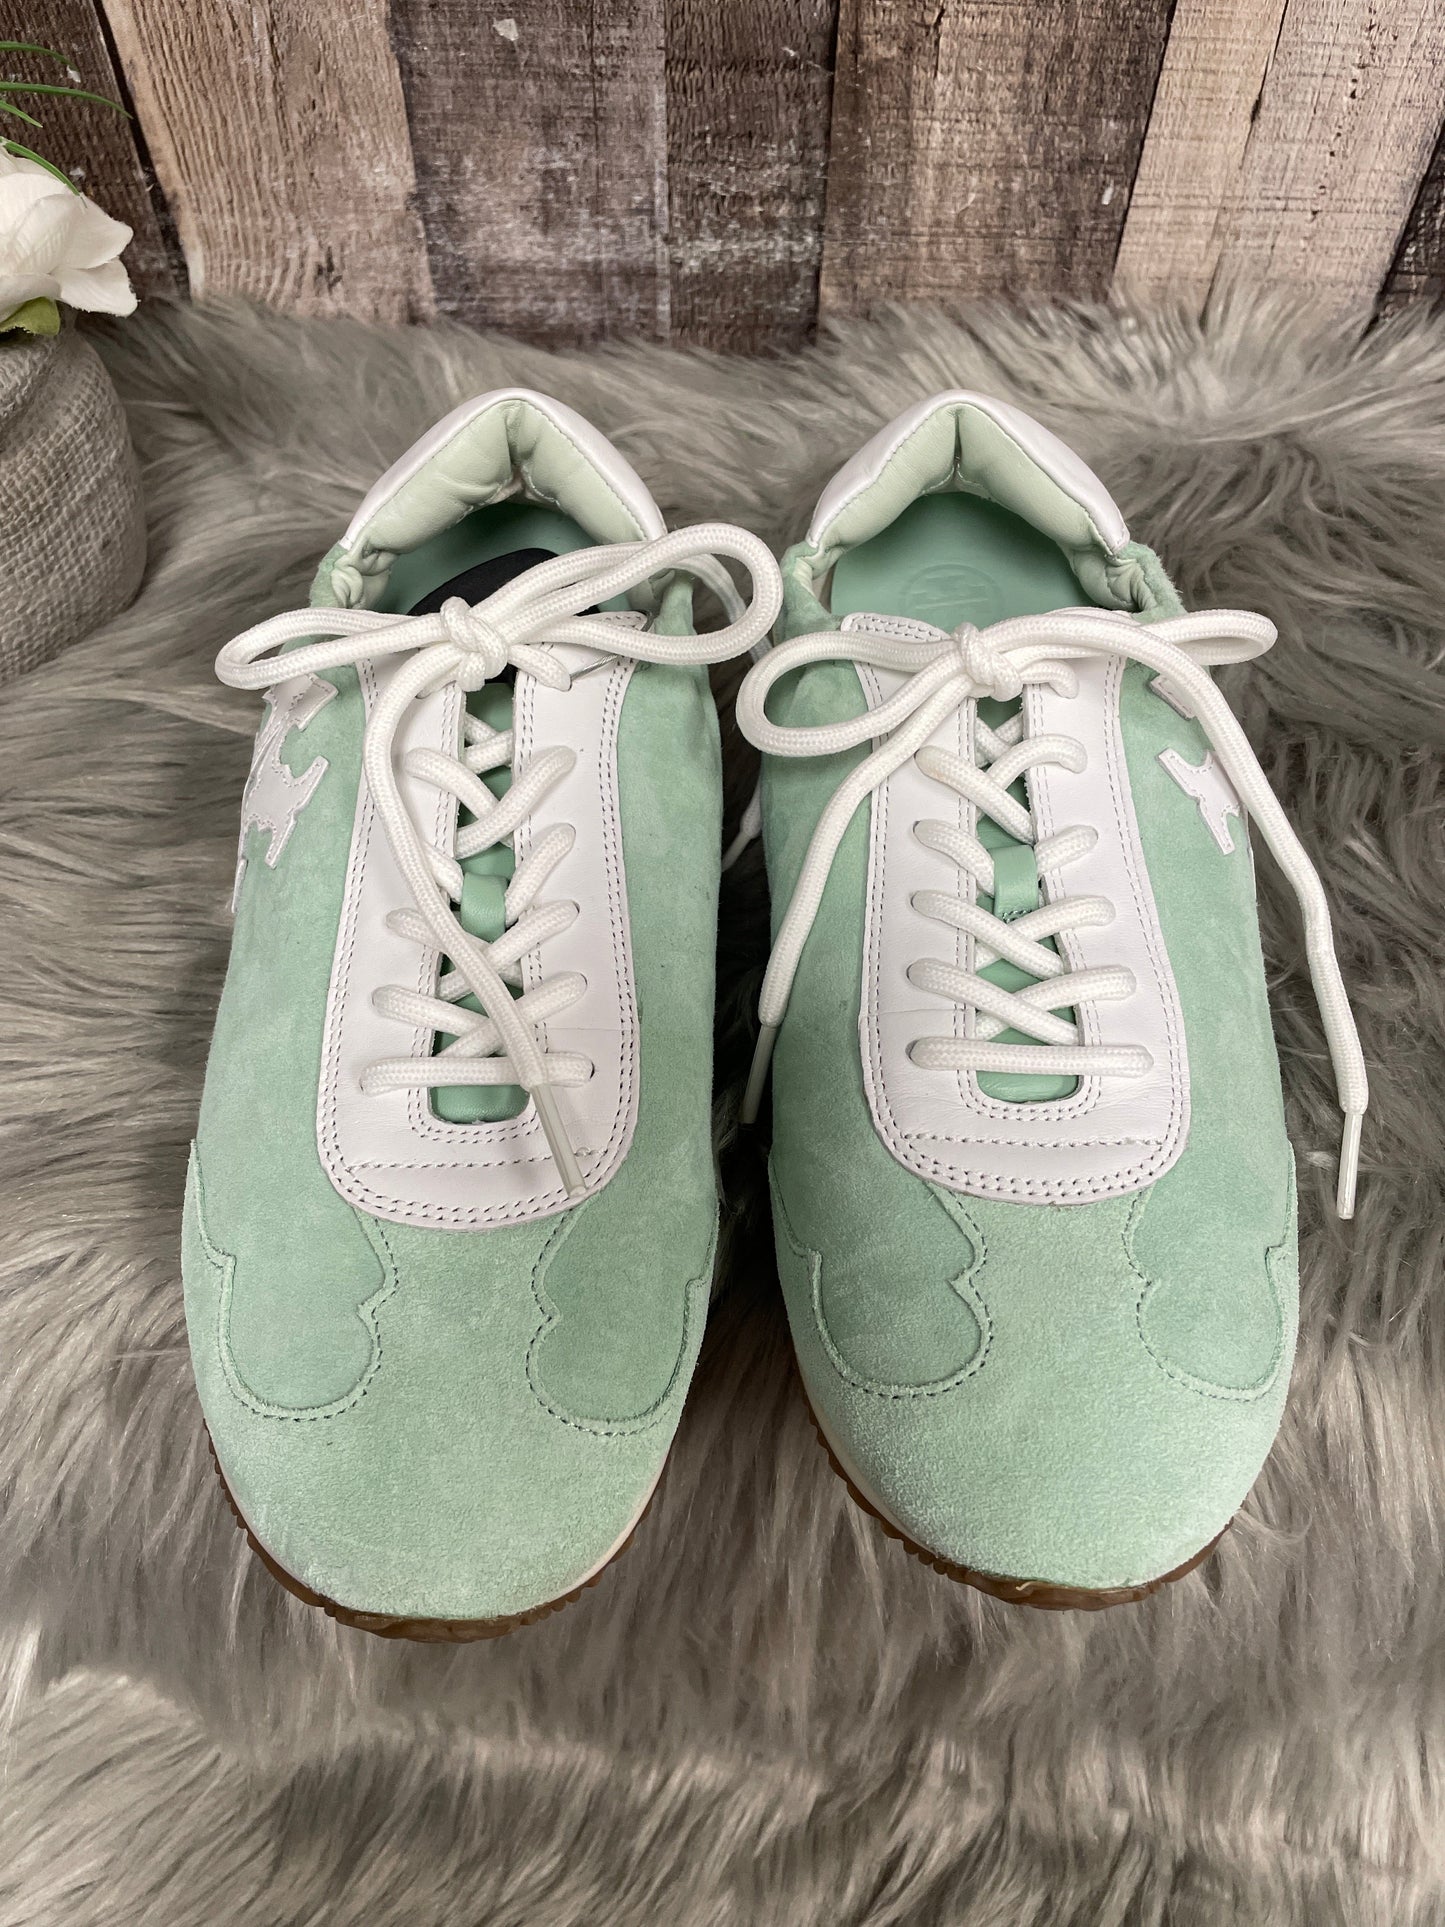 Green Shoes Sneakers Tory Burch, Size 8.5